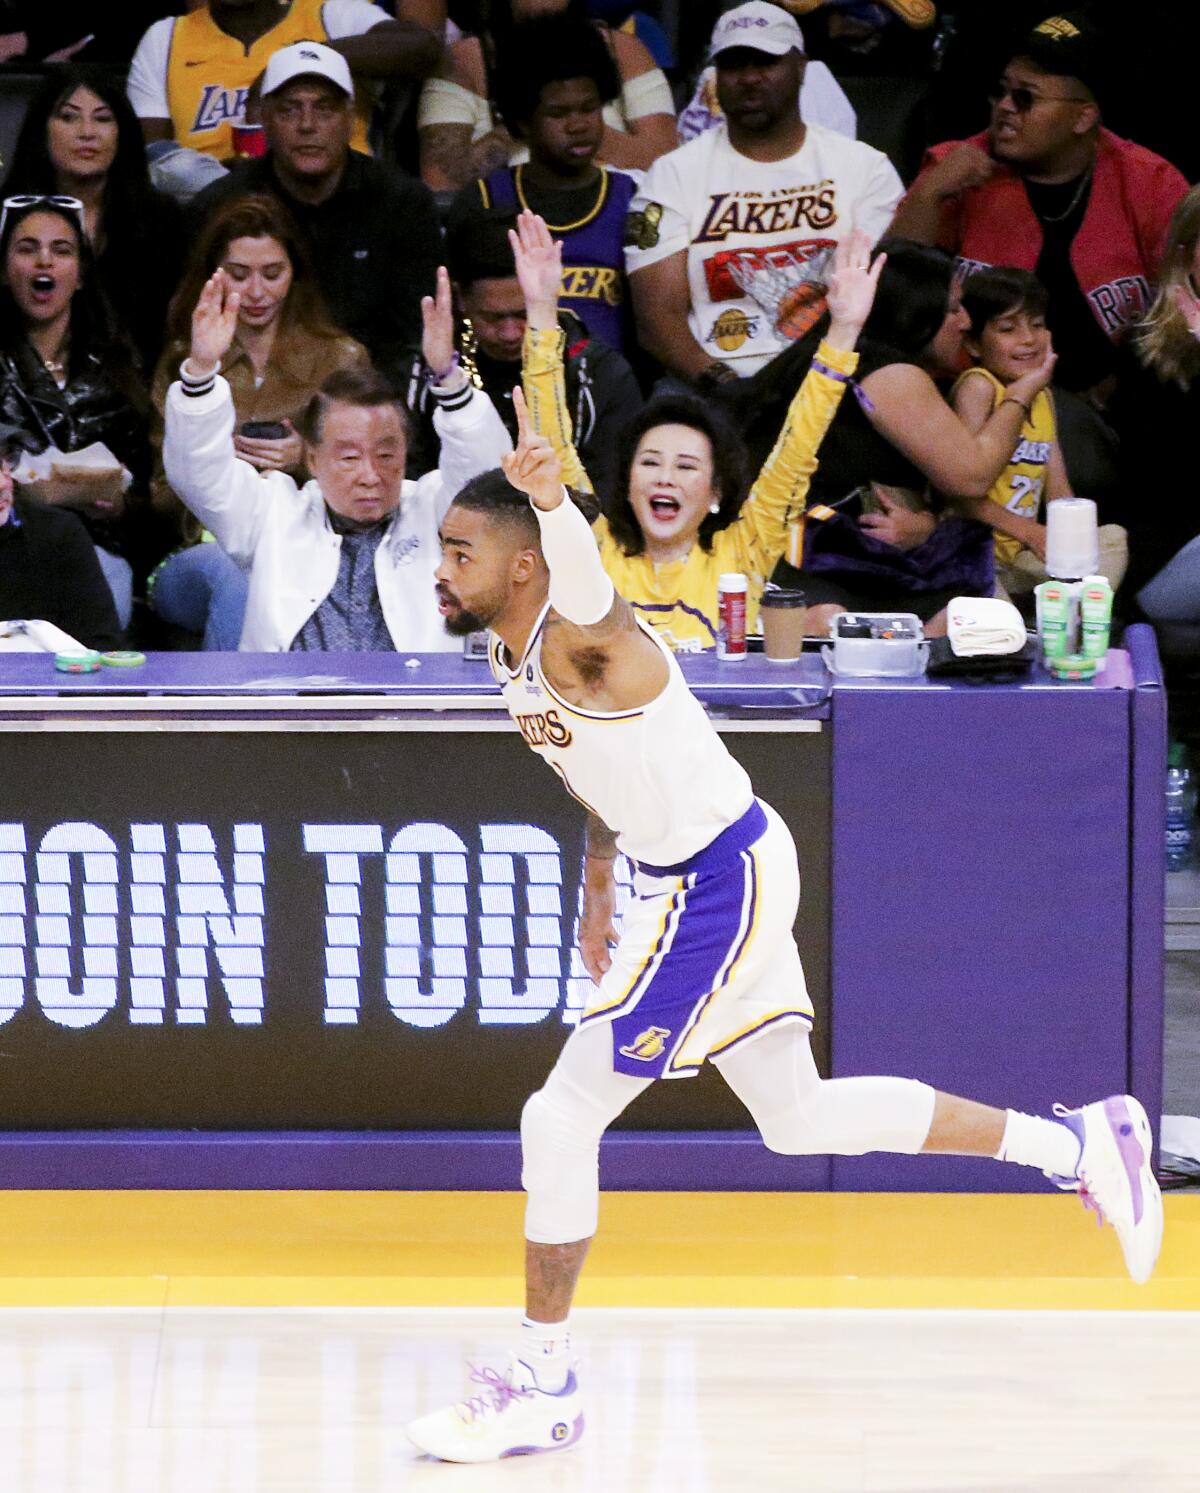 Lakers guard D'Angelo Russell runs up court with his left arm overhead with index finger extended after making a shot.